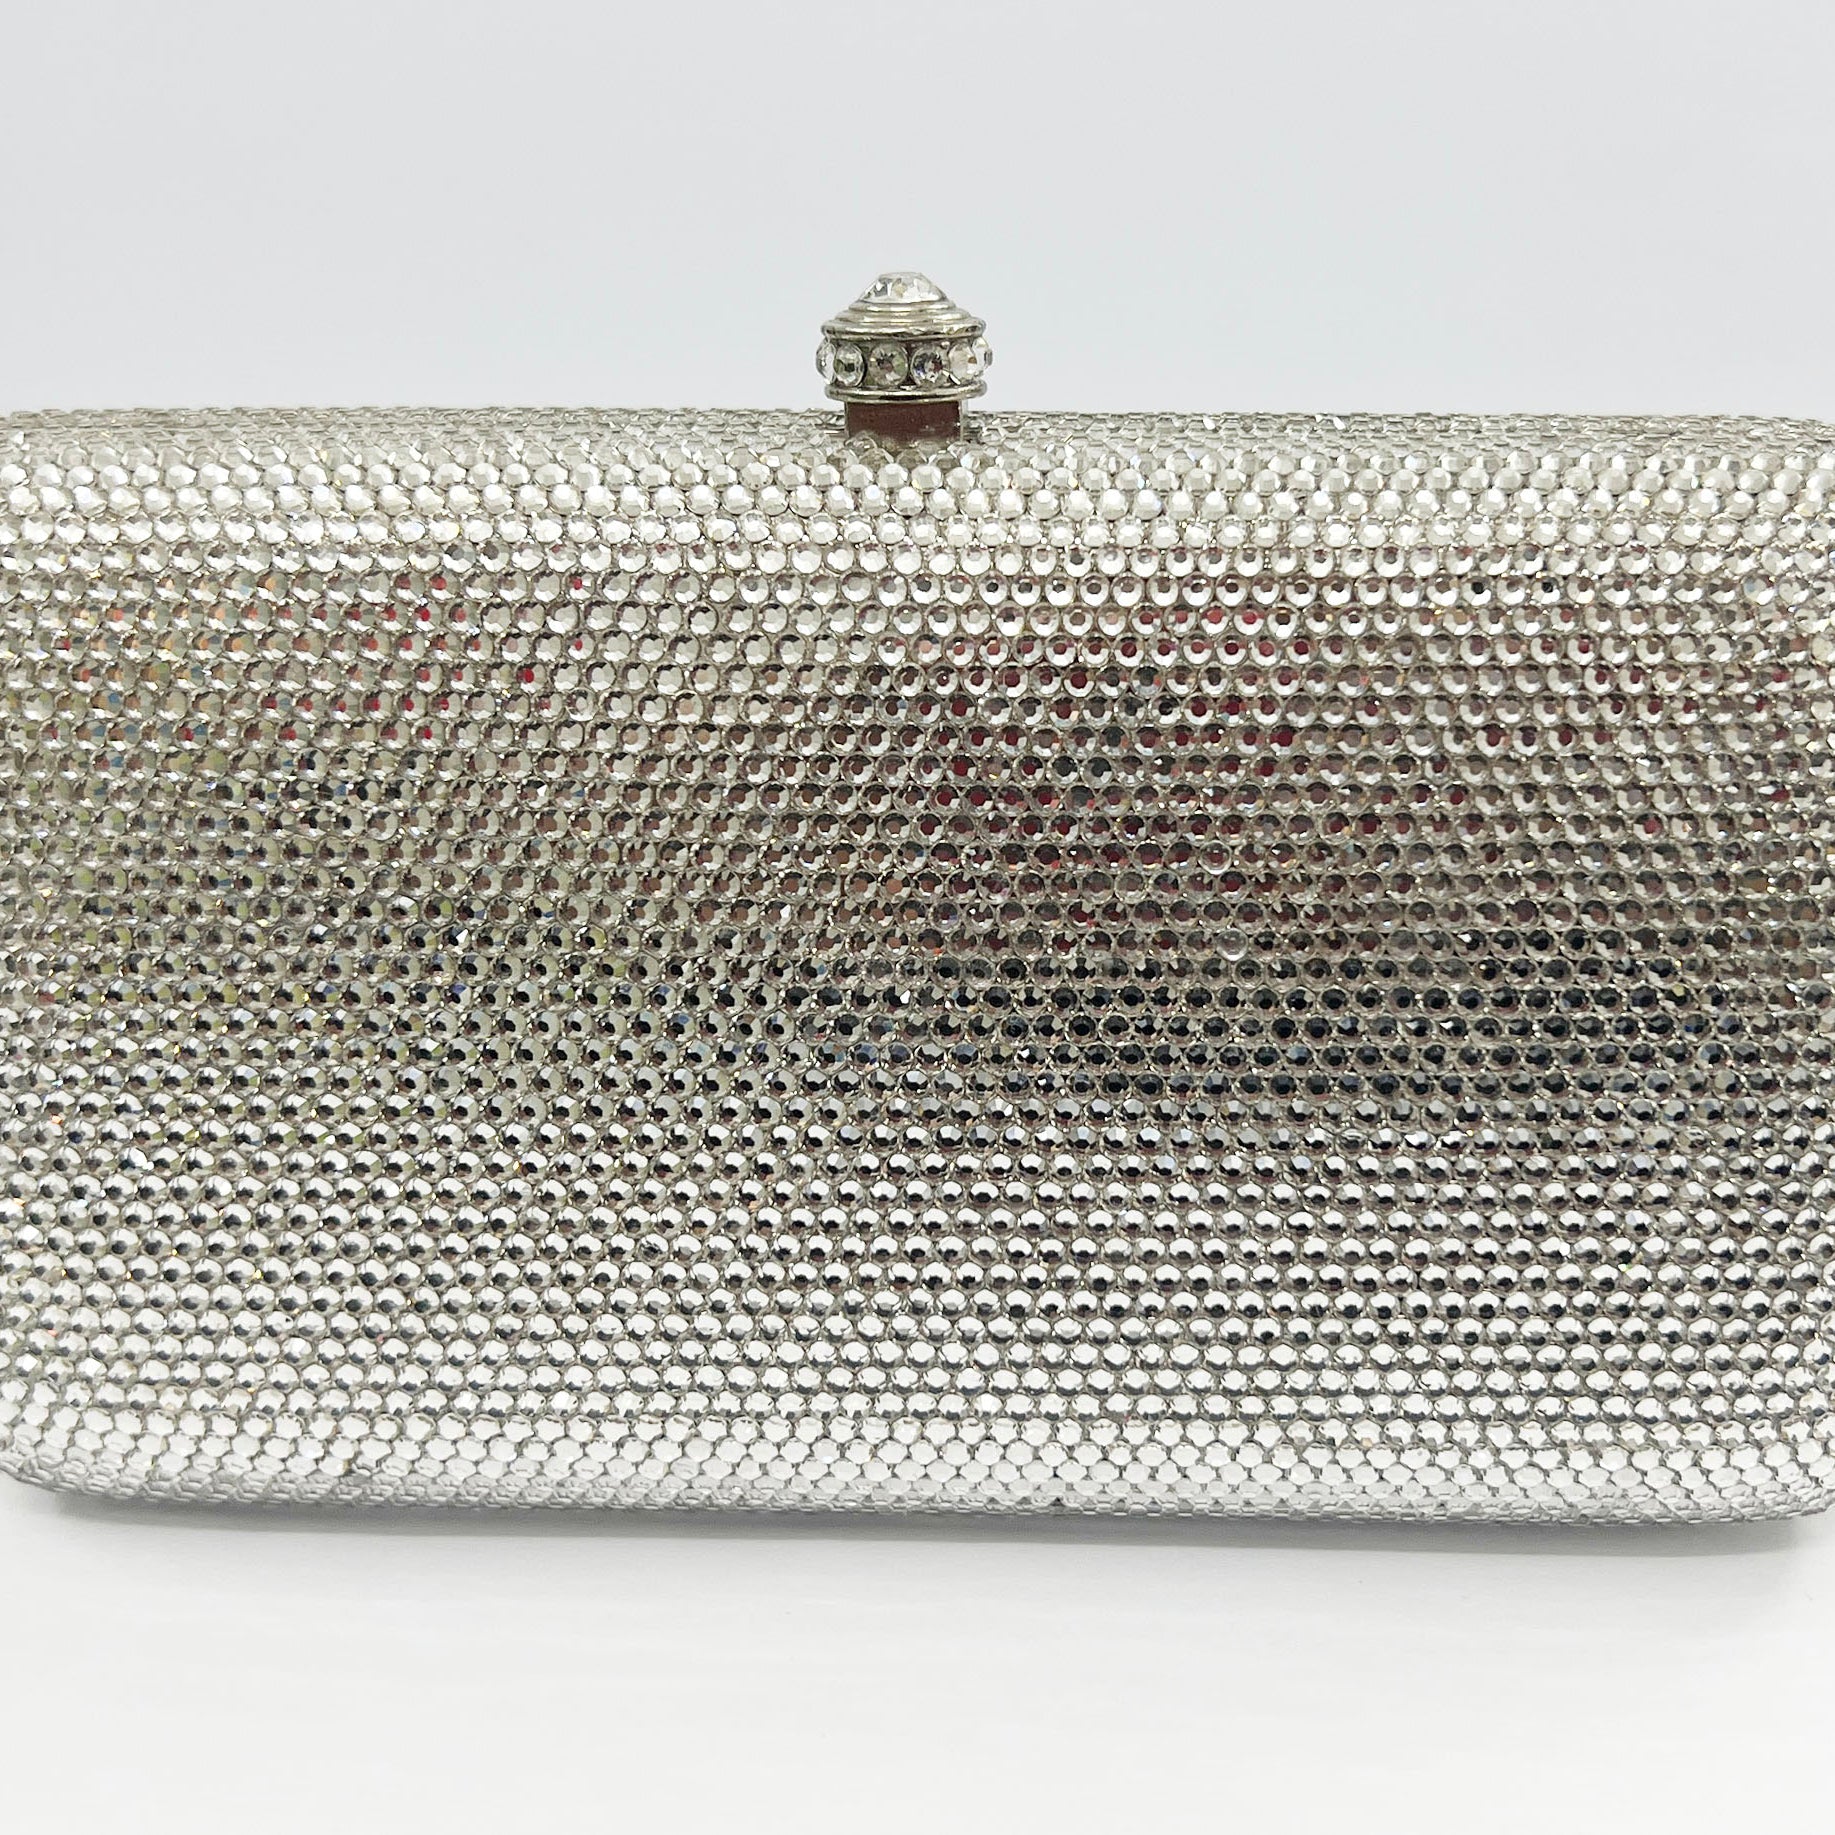 Silver Rounded Rectangle Box Evening Bag HB2408